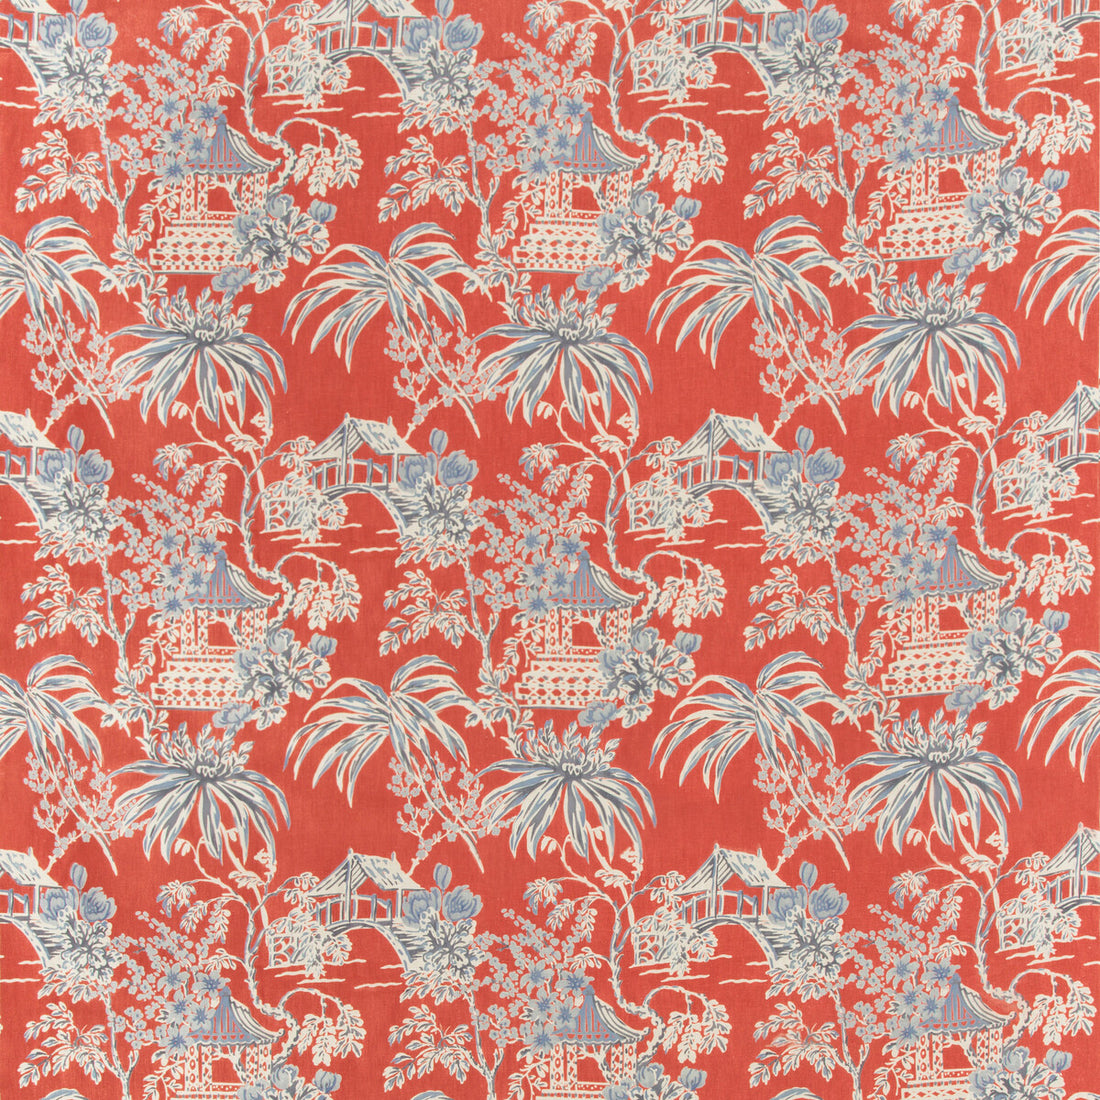 Tongli Print fabric in red color - pattern 8019138.195.0 - by Brunschwig &amp; Fils in the Summer Palace collection